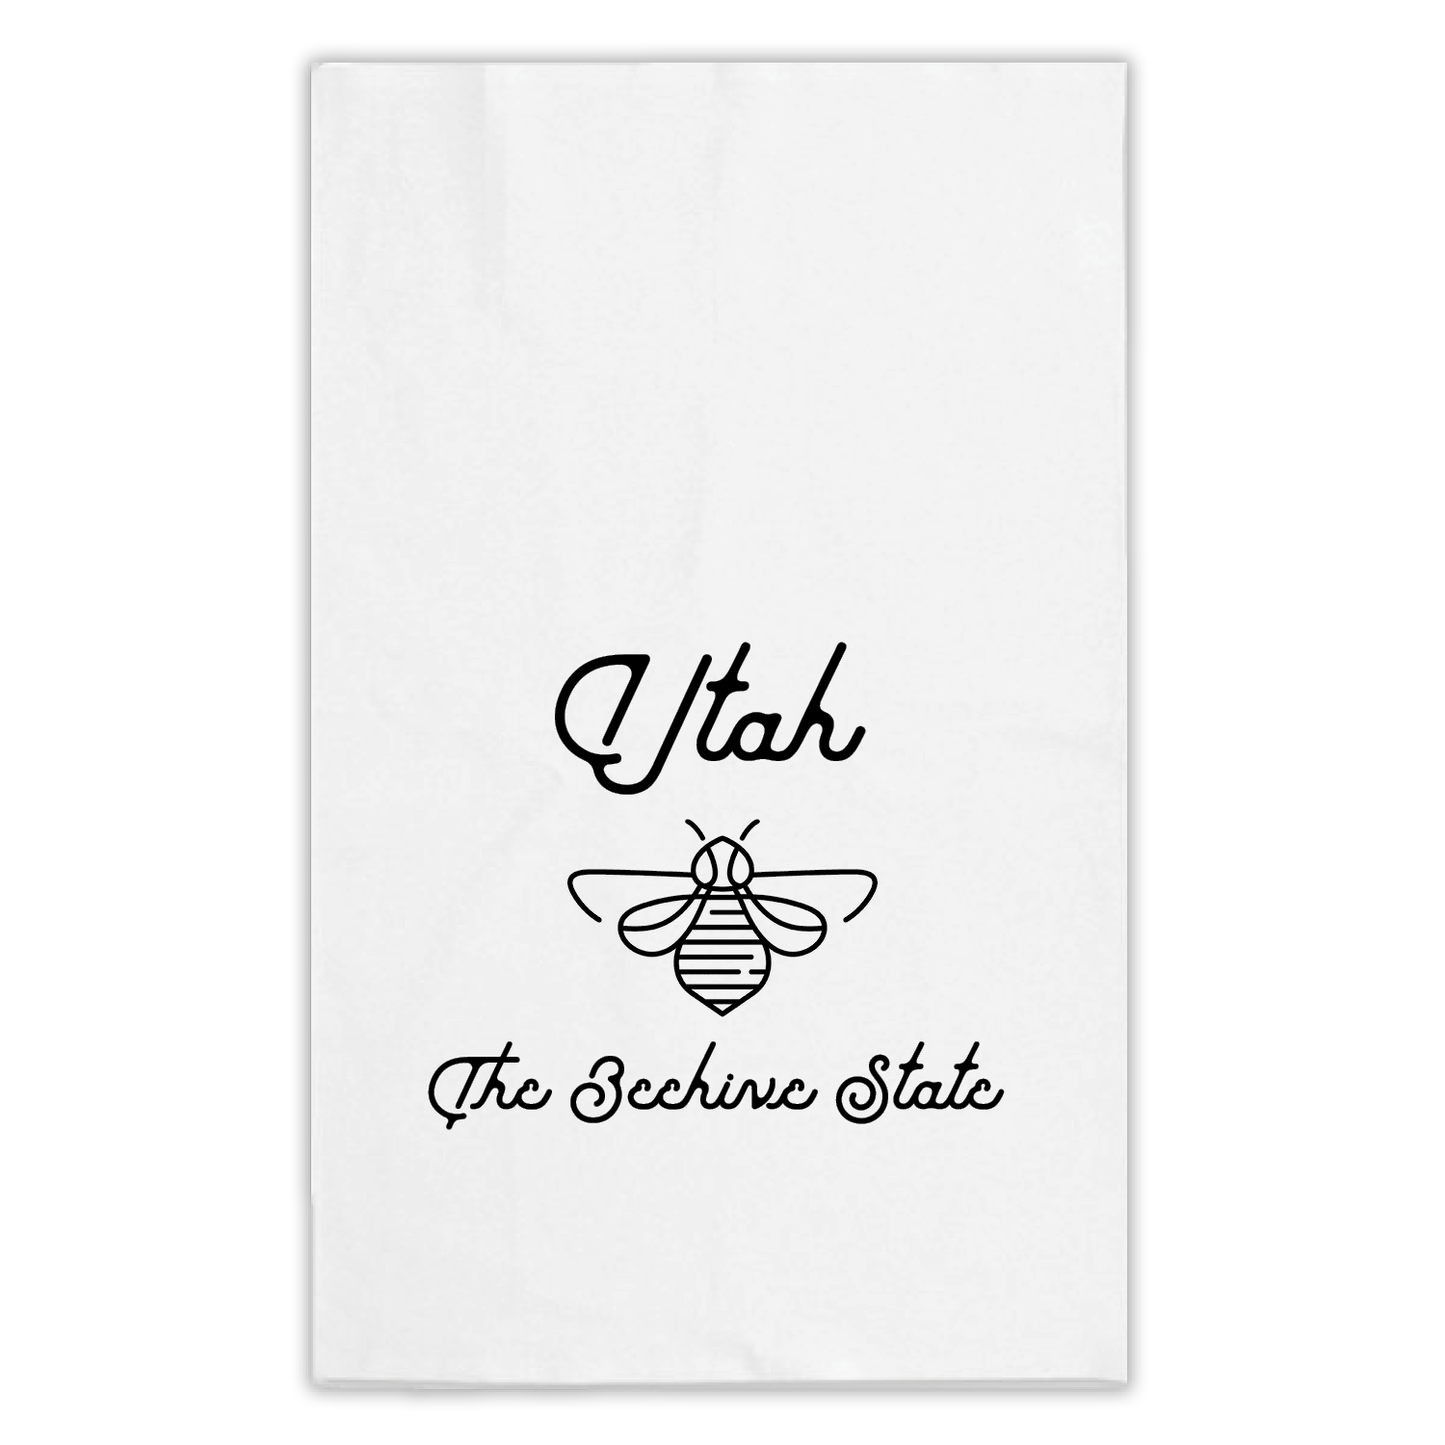 Utah the Beehive State tea towel in script cursive font featuring a line drawn bee.